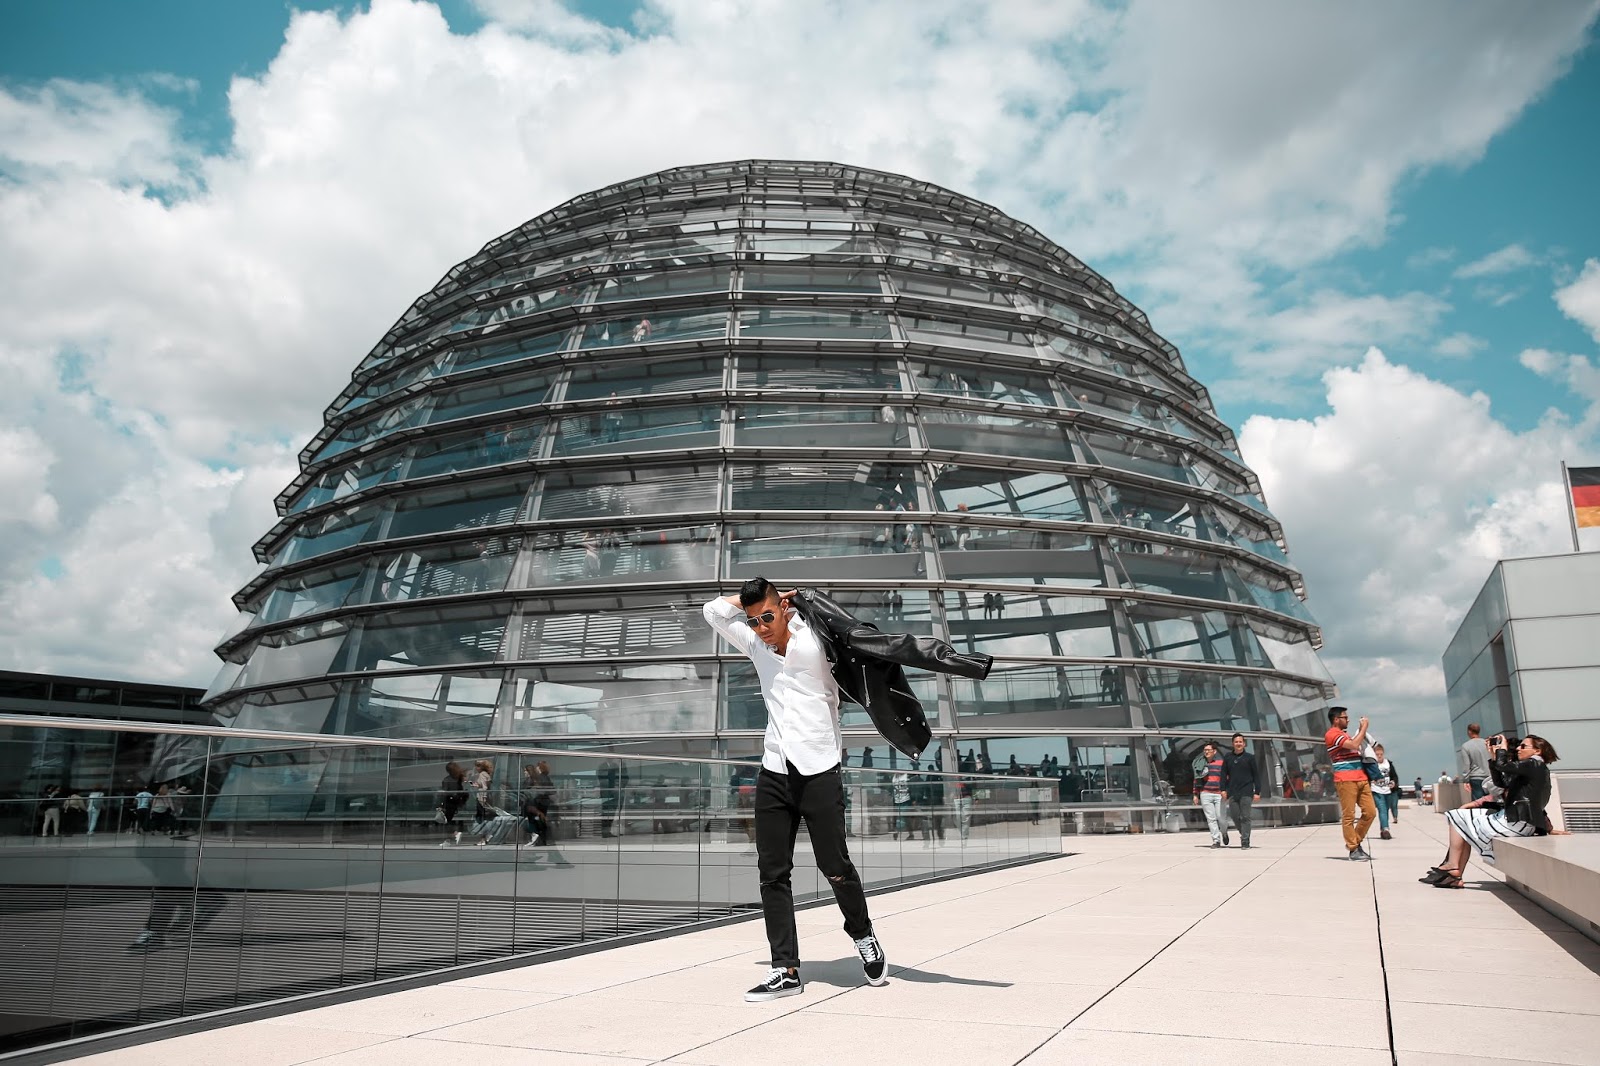 Leo Chan at The Reichstag Building Dome